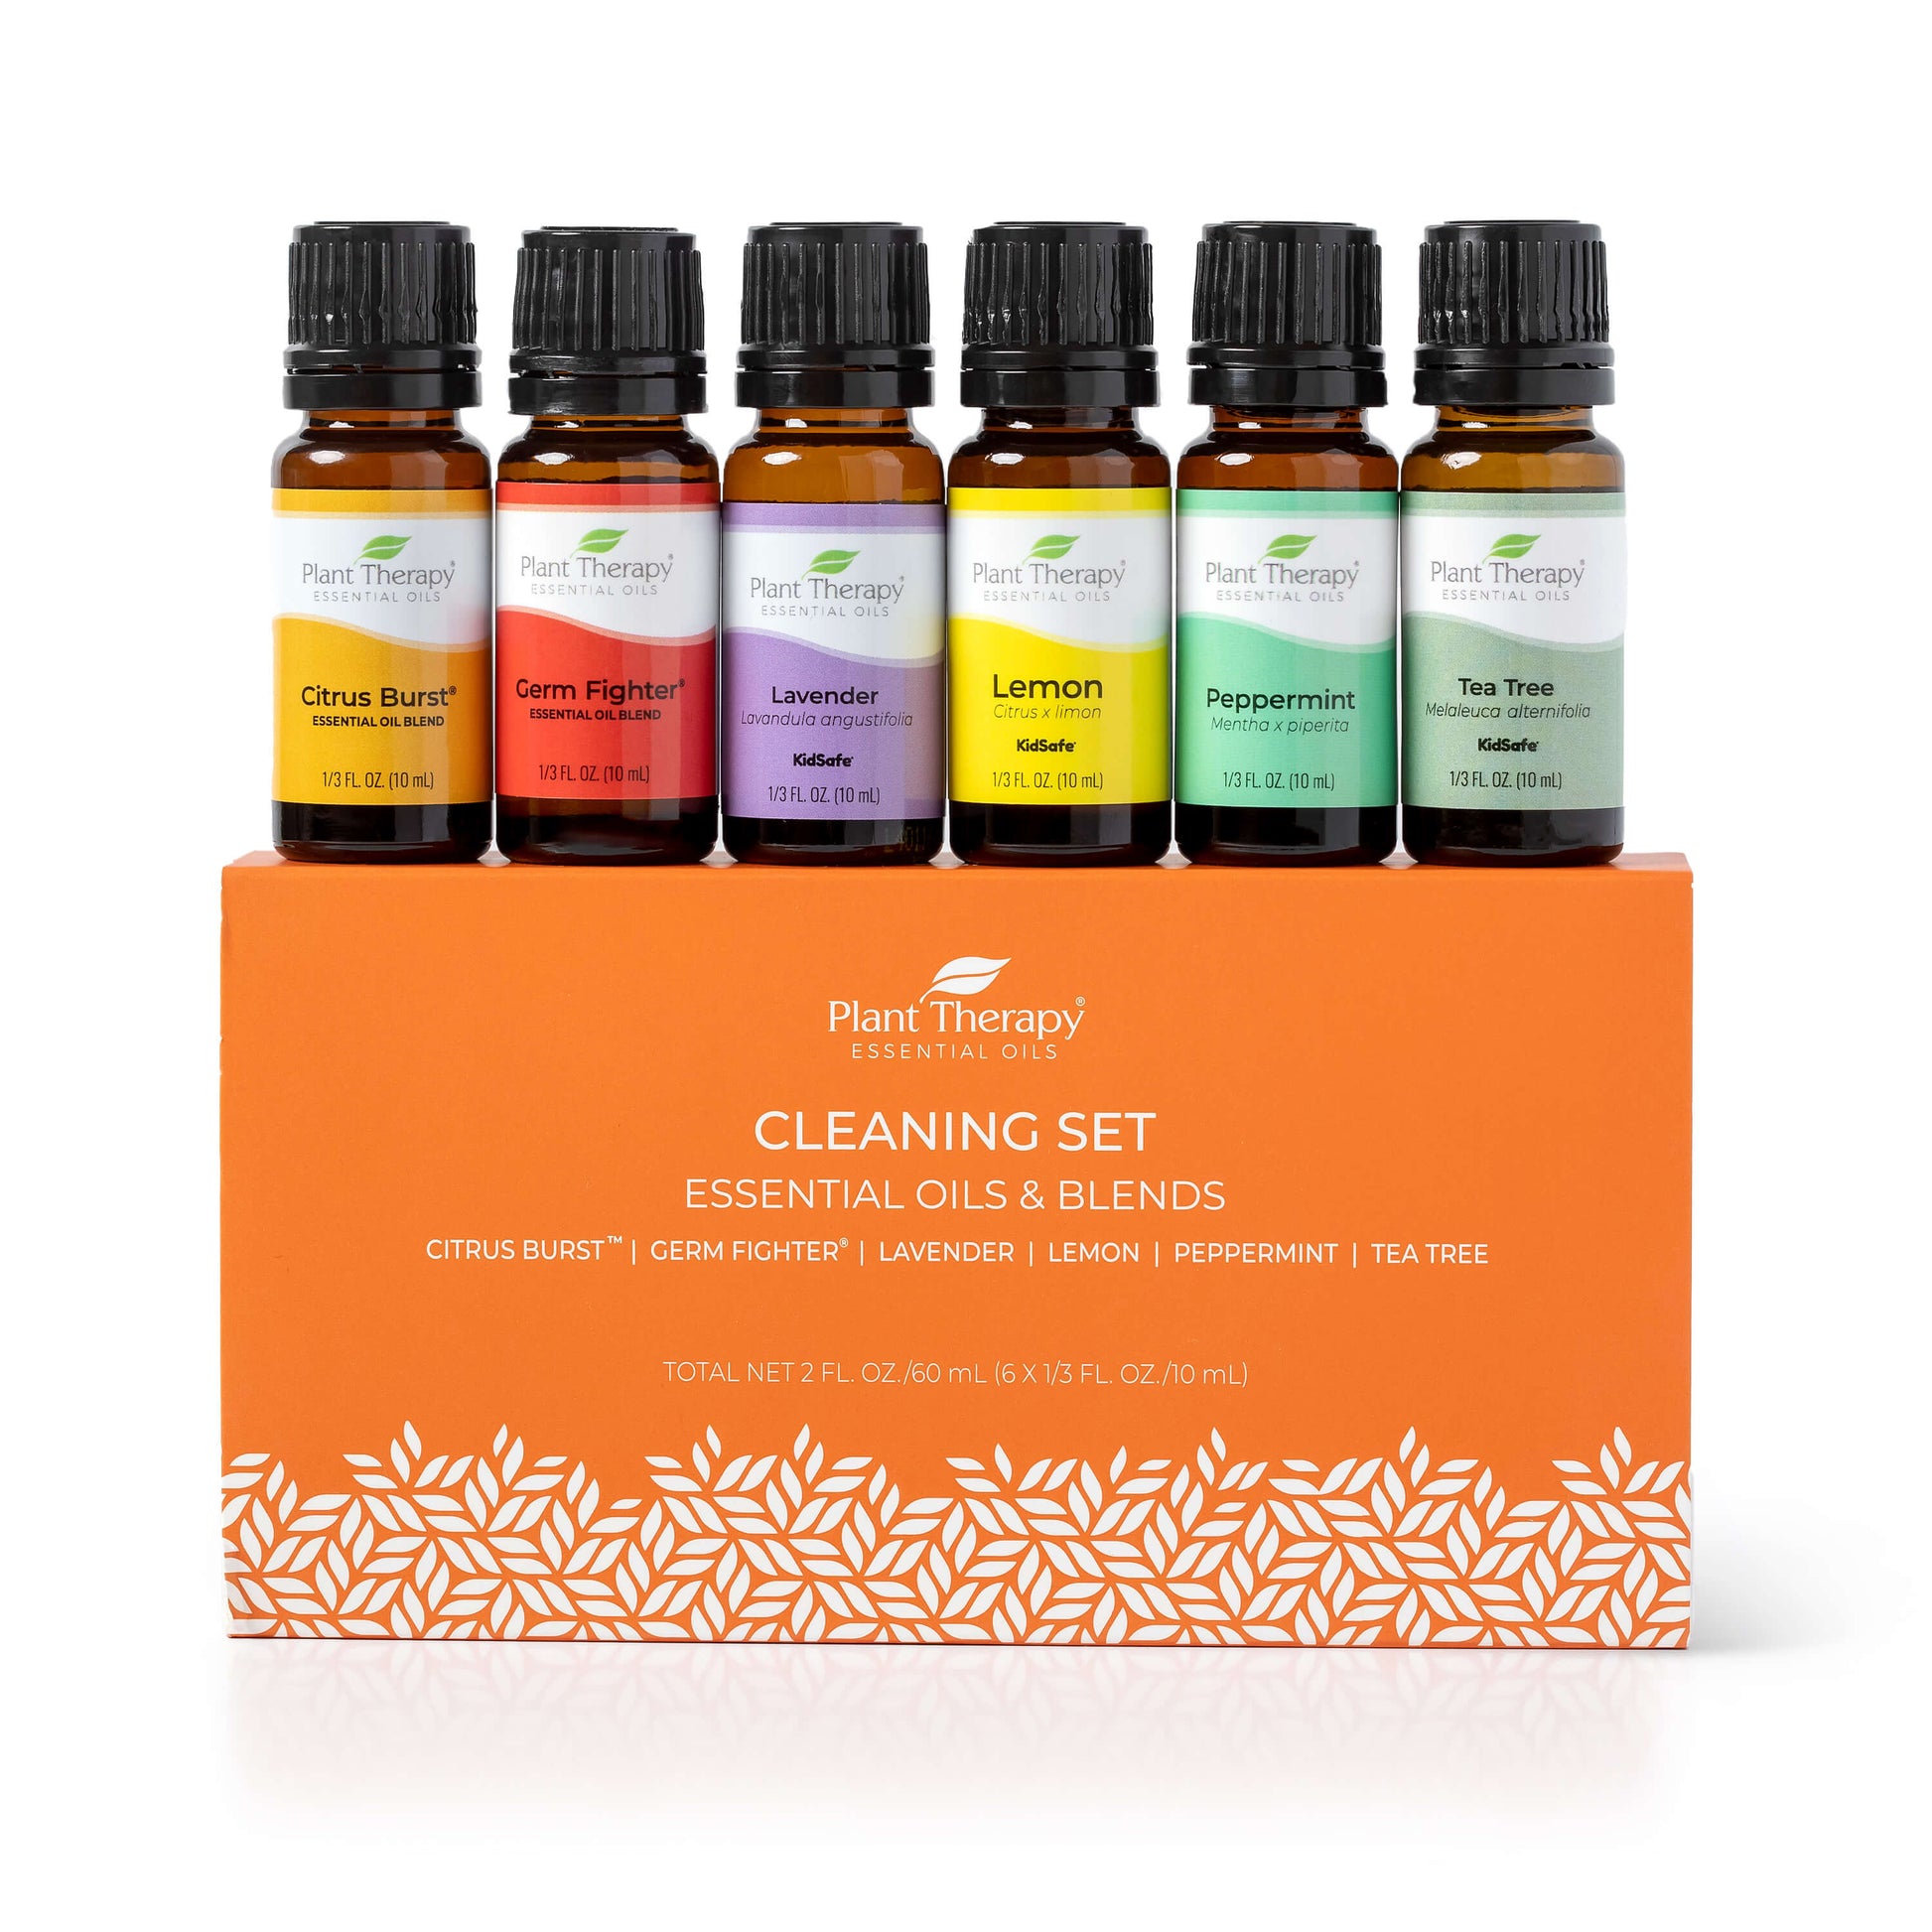 Plant Therapy Essential Oil Blend 3 Set in Fall For All - Organic Bunny